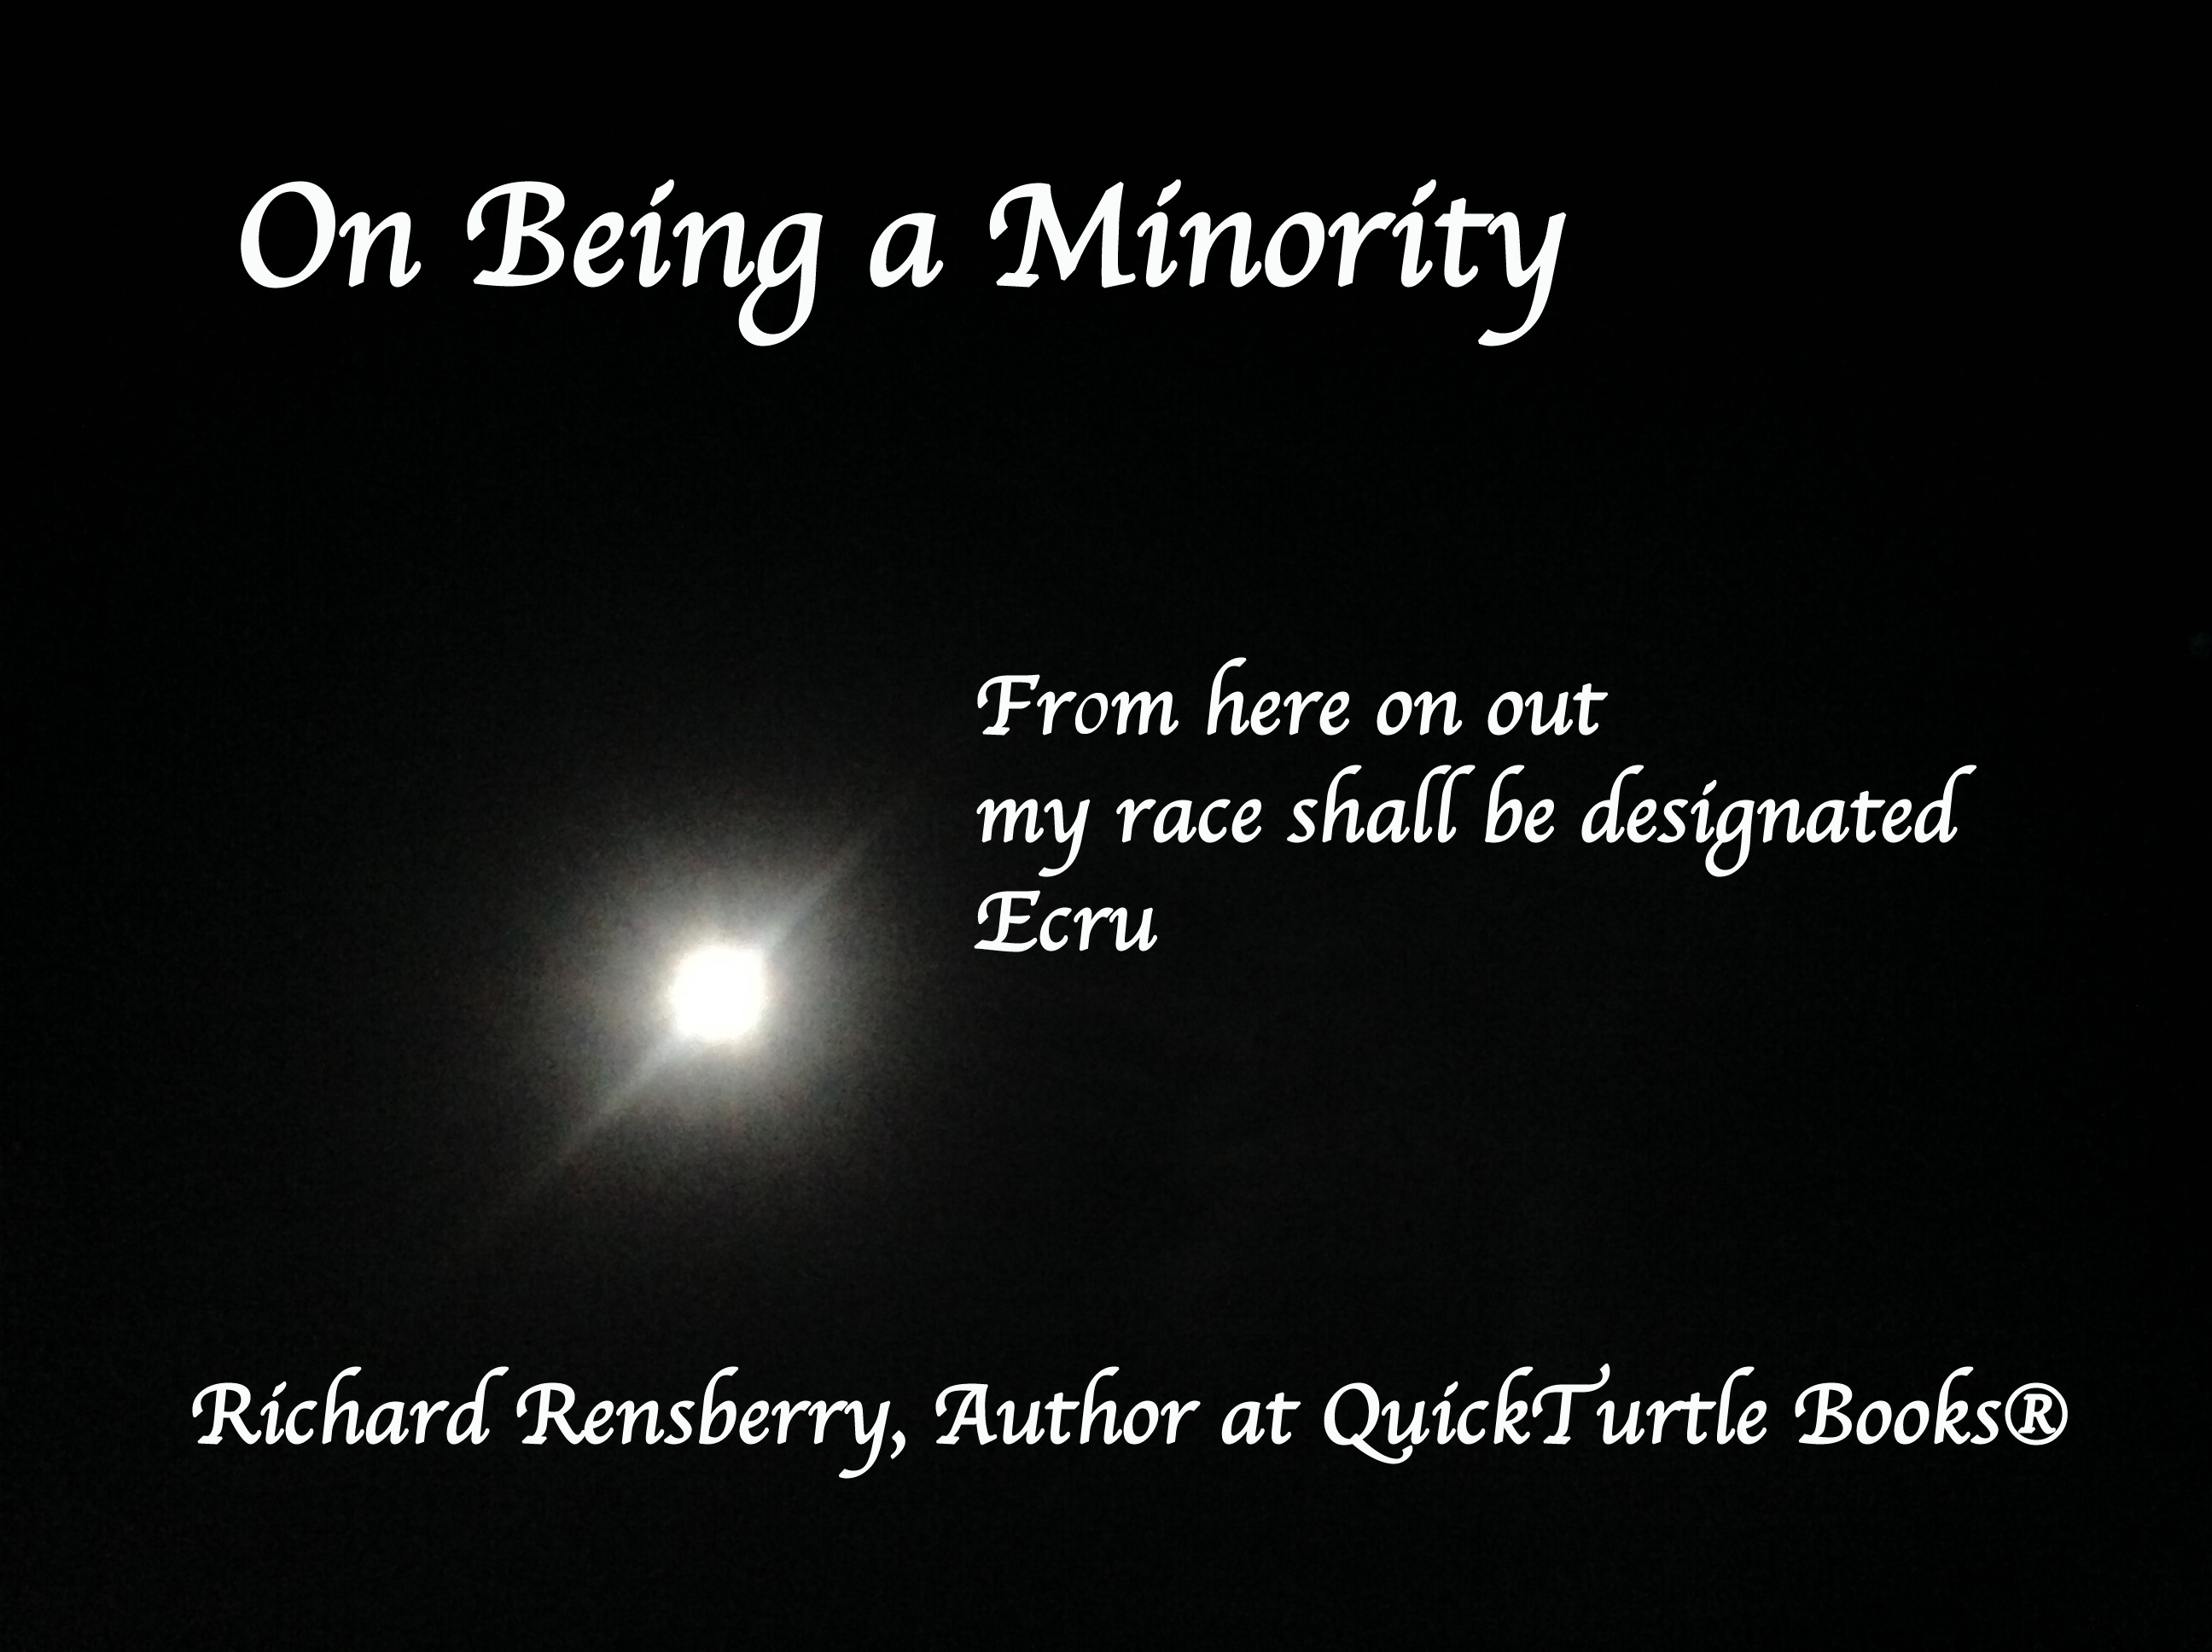 On Being a Minority